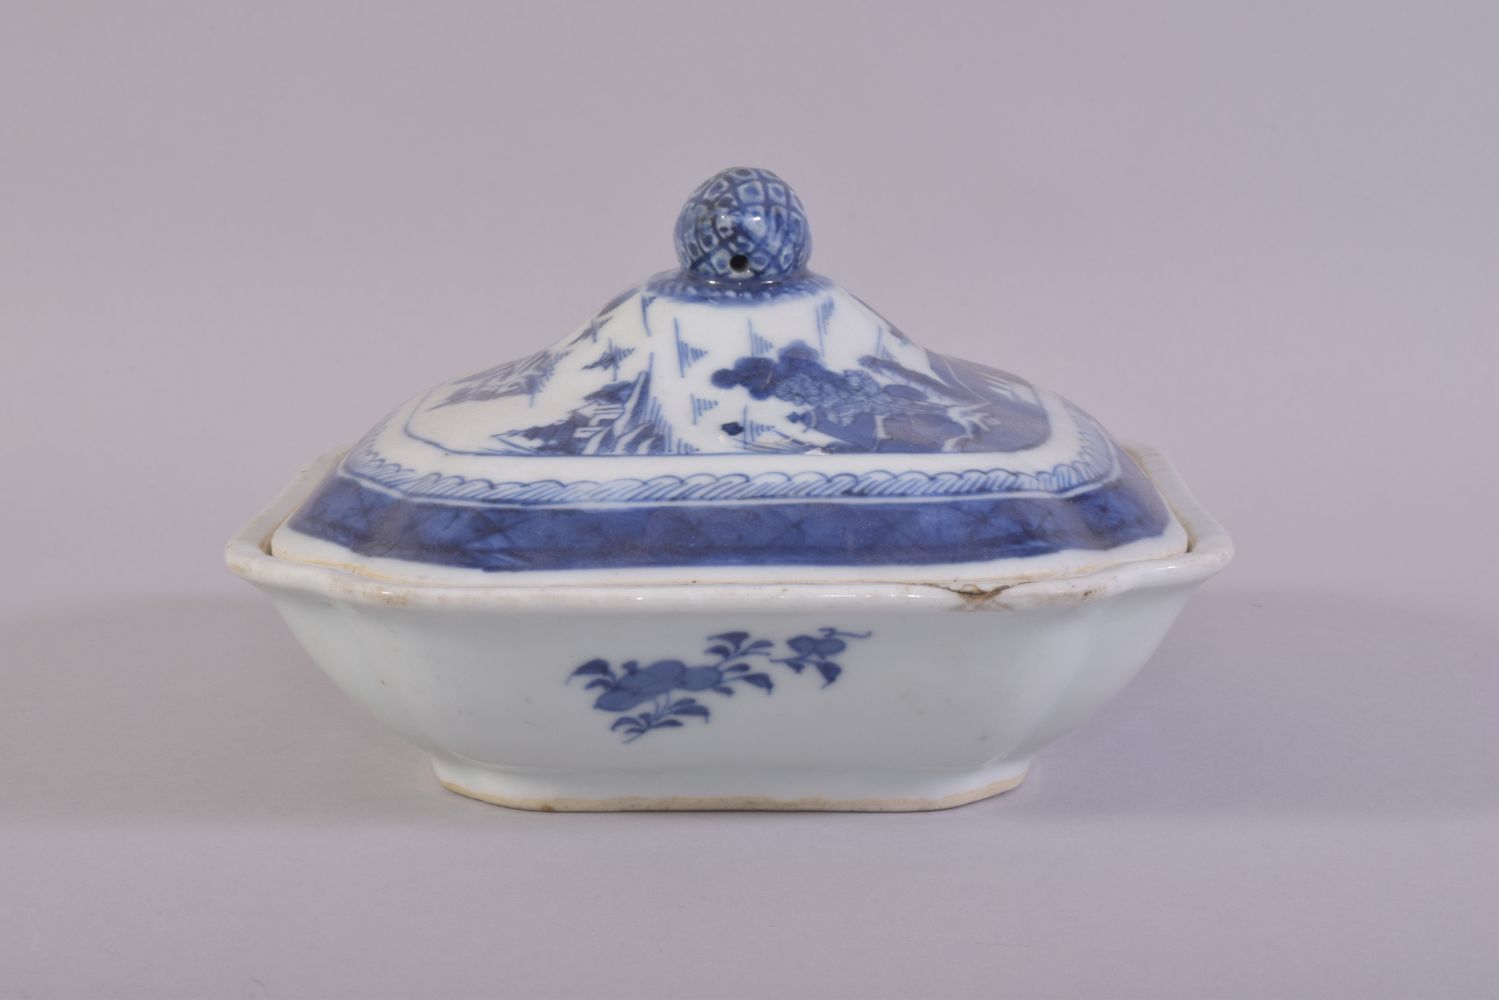 A CHINESE BLUE AND WHITE PORCELAIN TUREEN AND COVER, decorated with landscape scenes of buildings - Image 4 of 8